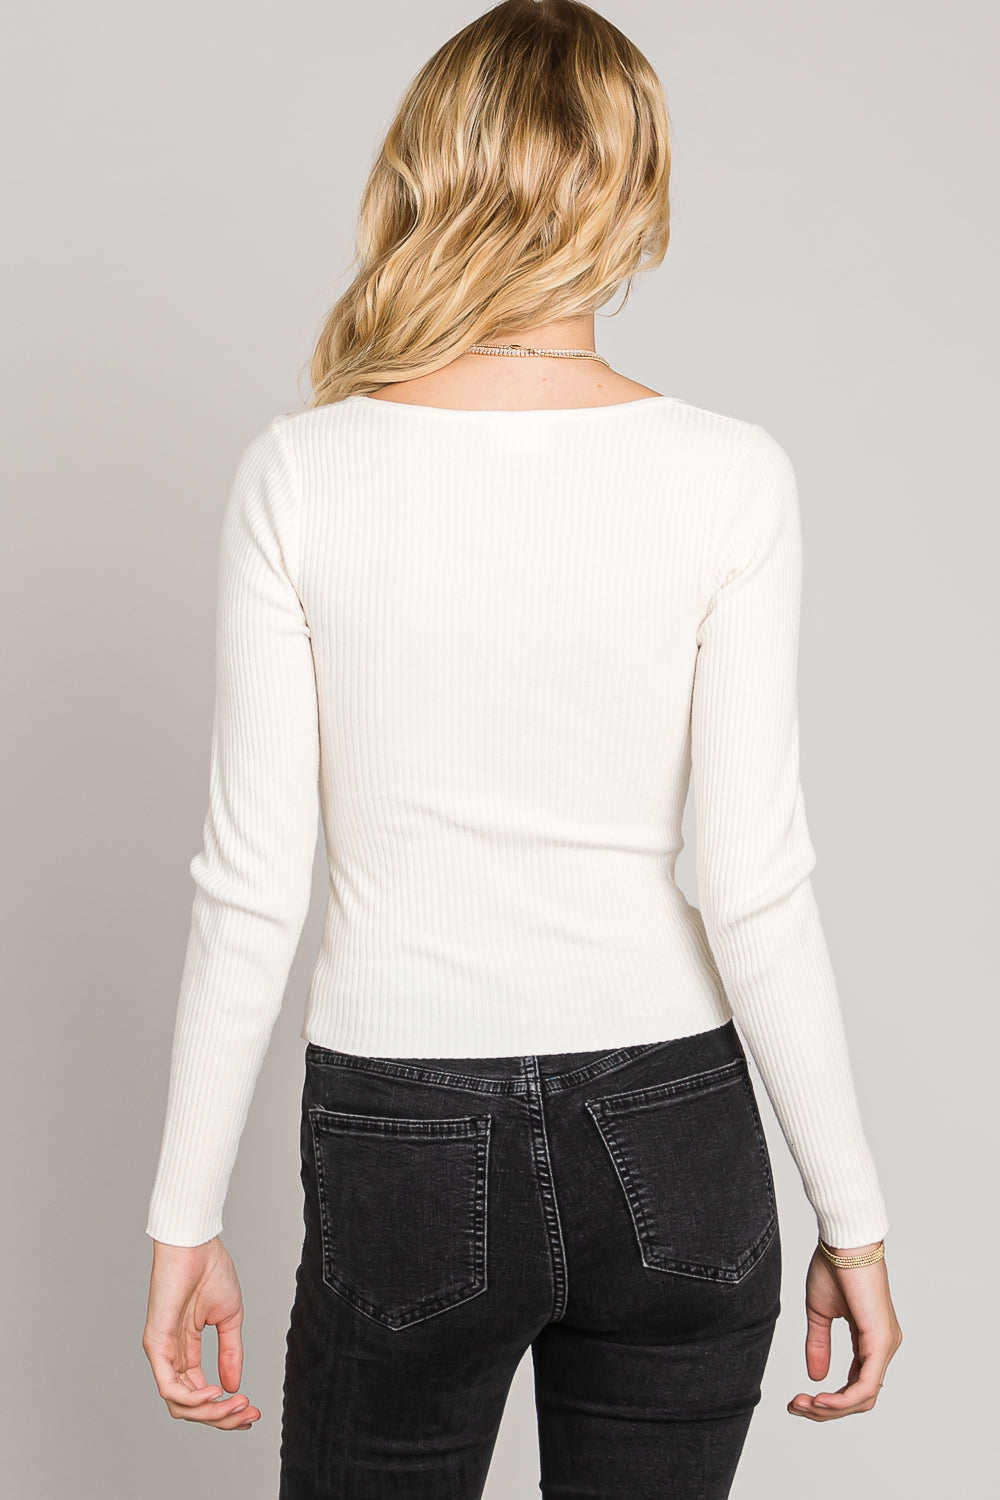 Florence Long Sleeve Square Neck Top